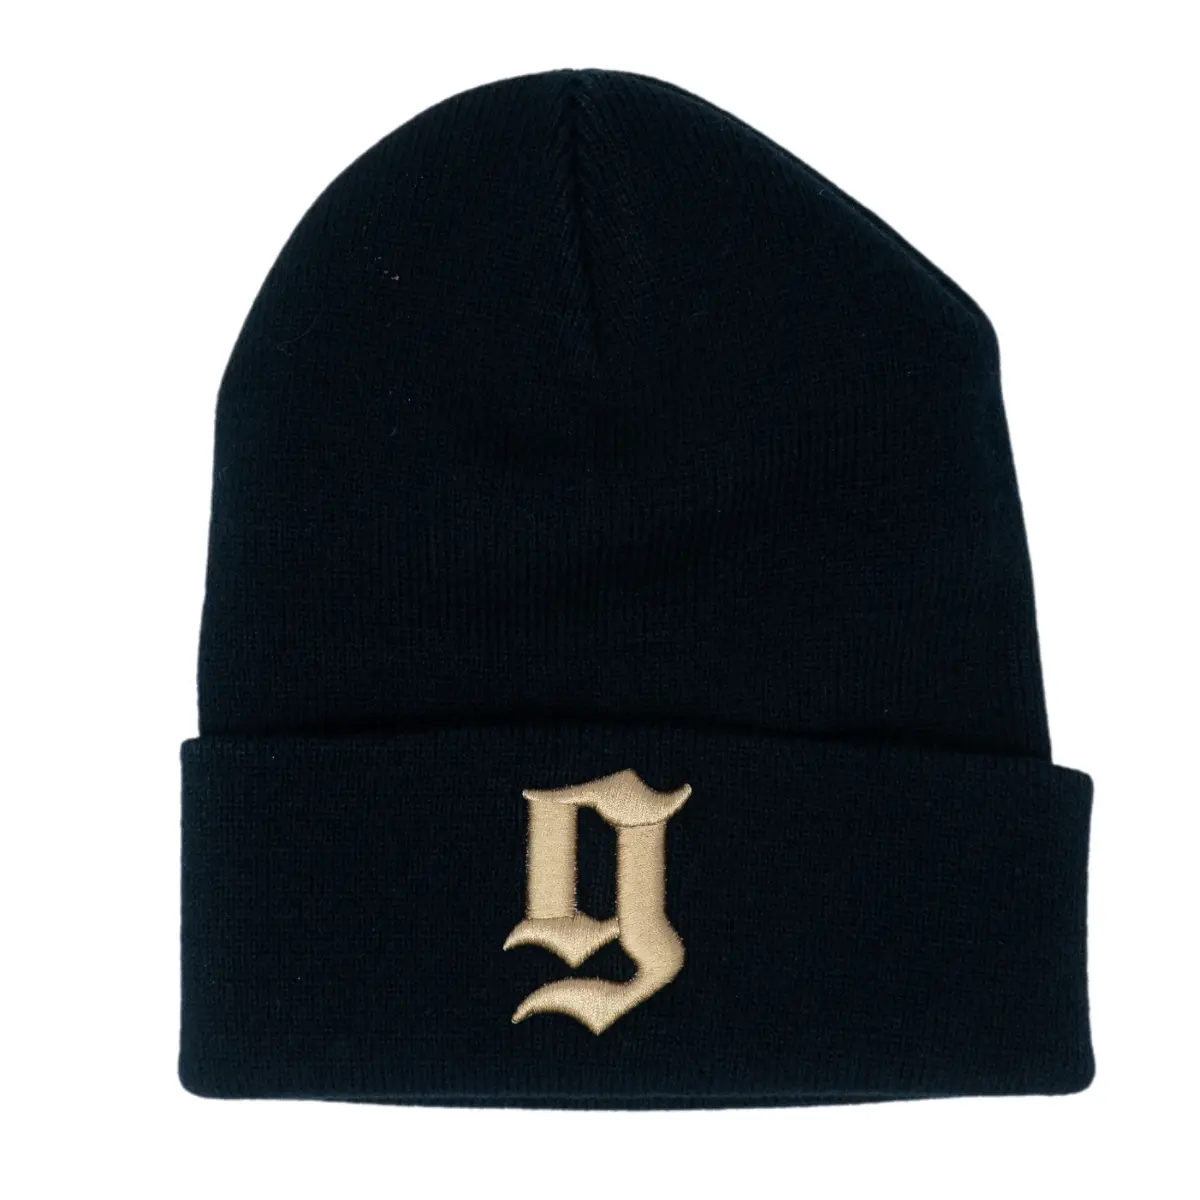 GBRS GROUP G'22 PUFF BEANIE - BLK/ODG